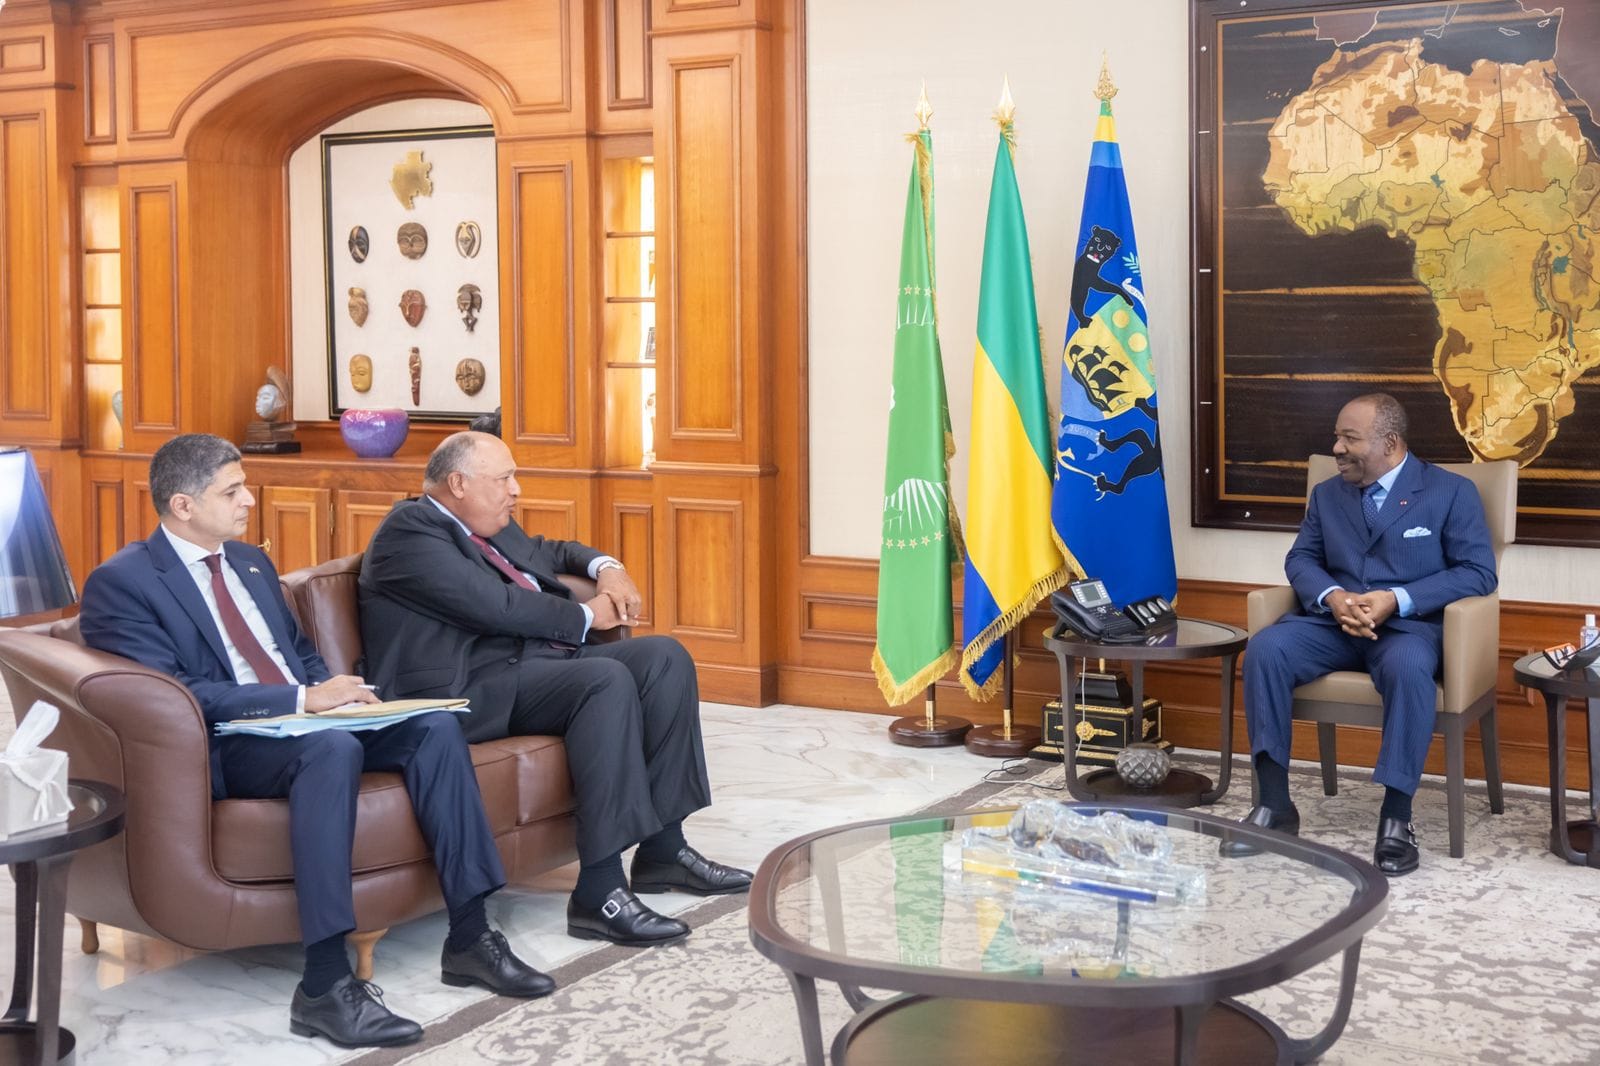 Shoukry to Gabon President: Egypt intends to make its presidency of COP27 an expression of Africa's aspirations and priorities